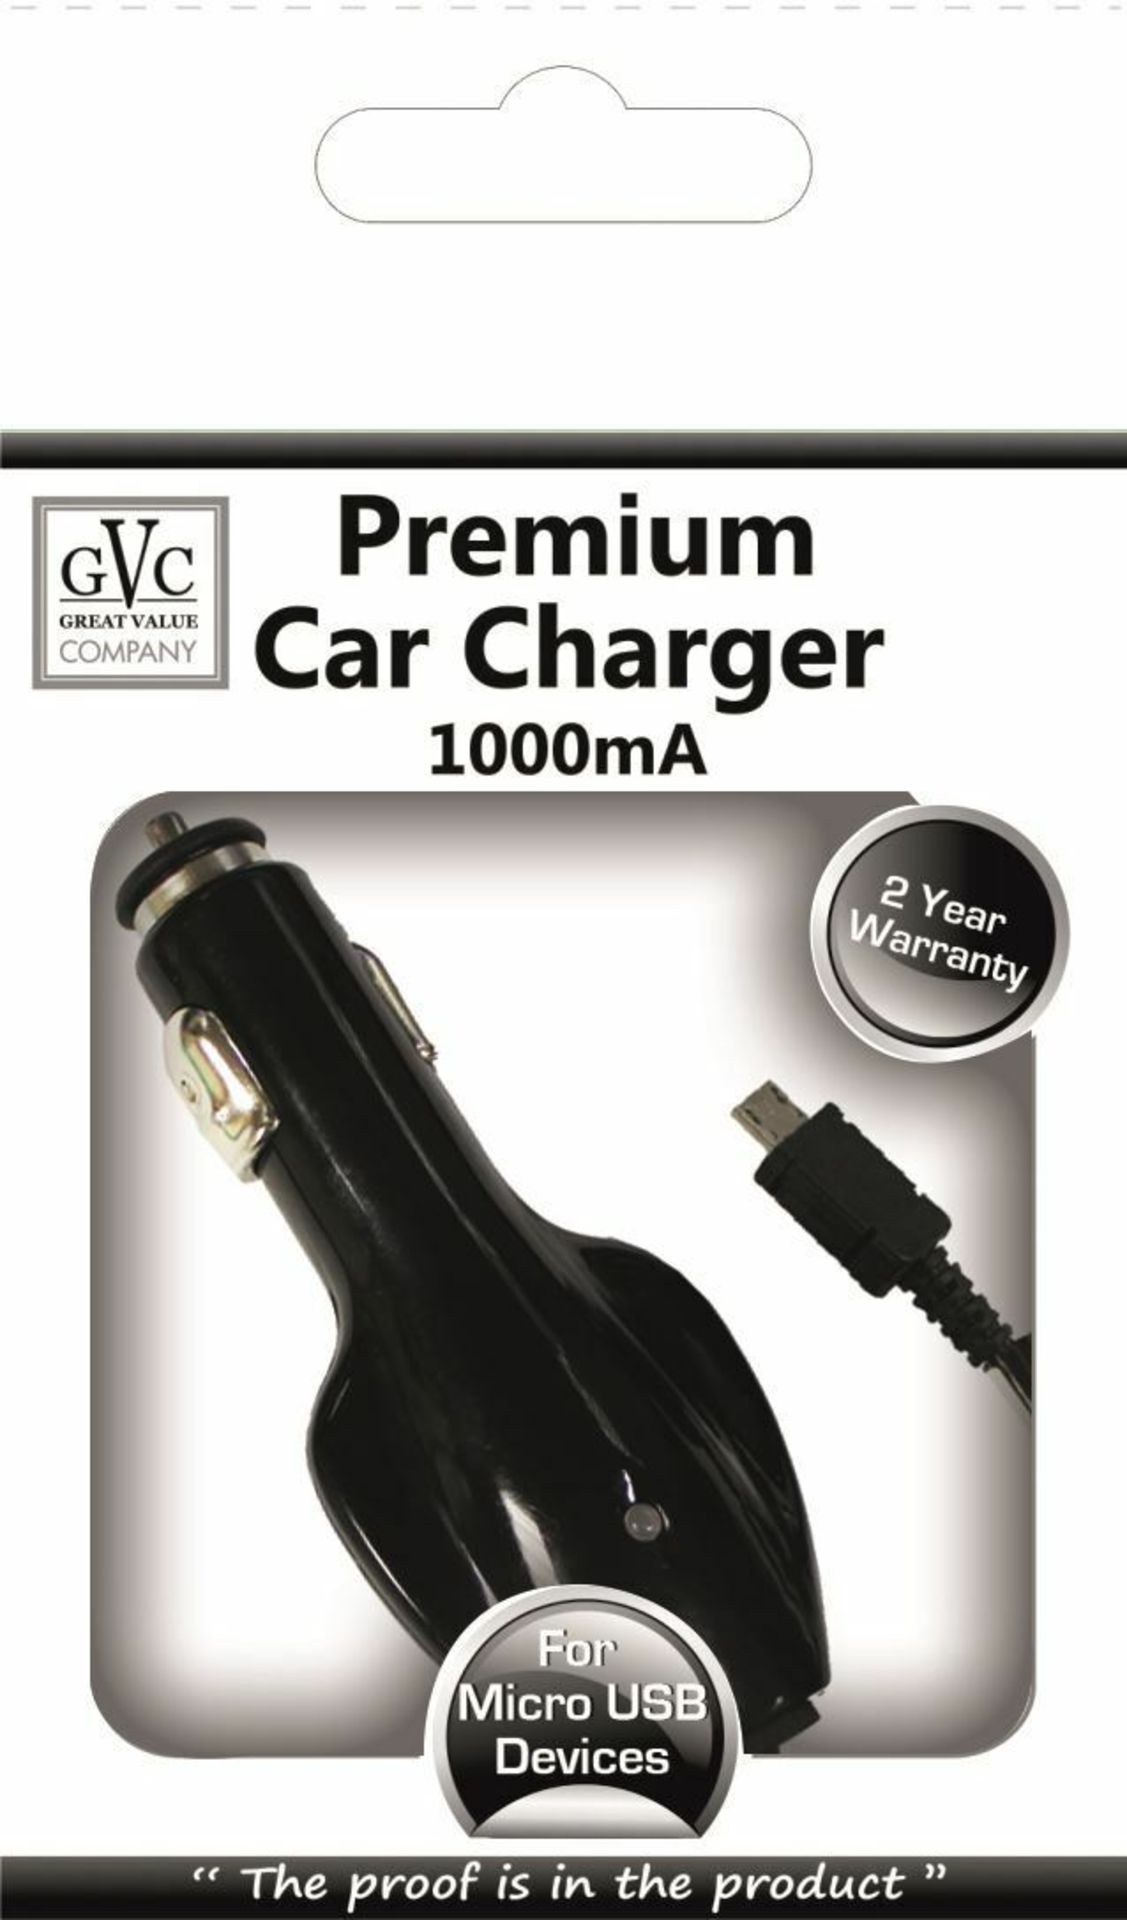 100 x GVC 1000mA Car Charger For Micro USB Devices - Black